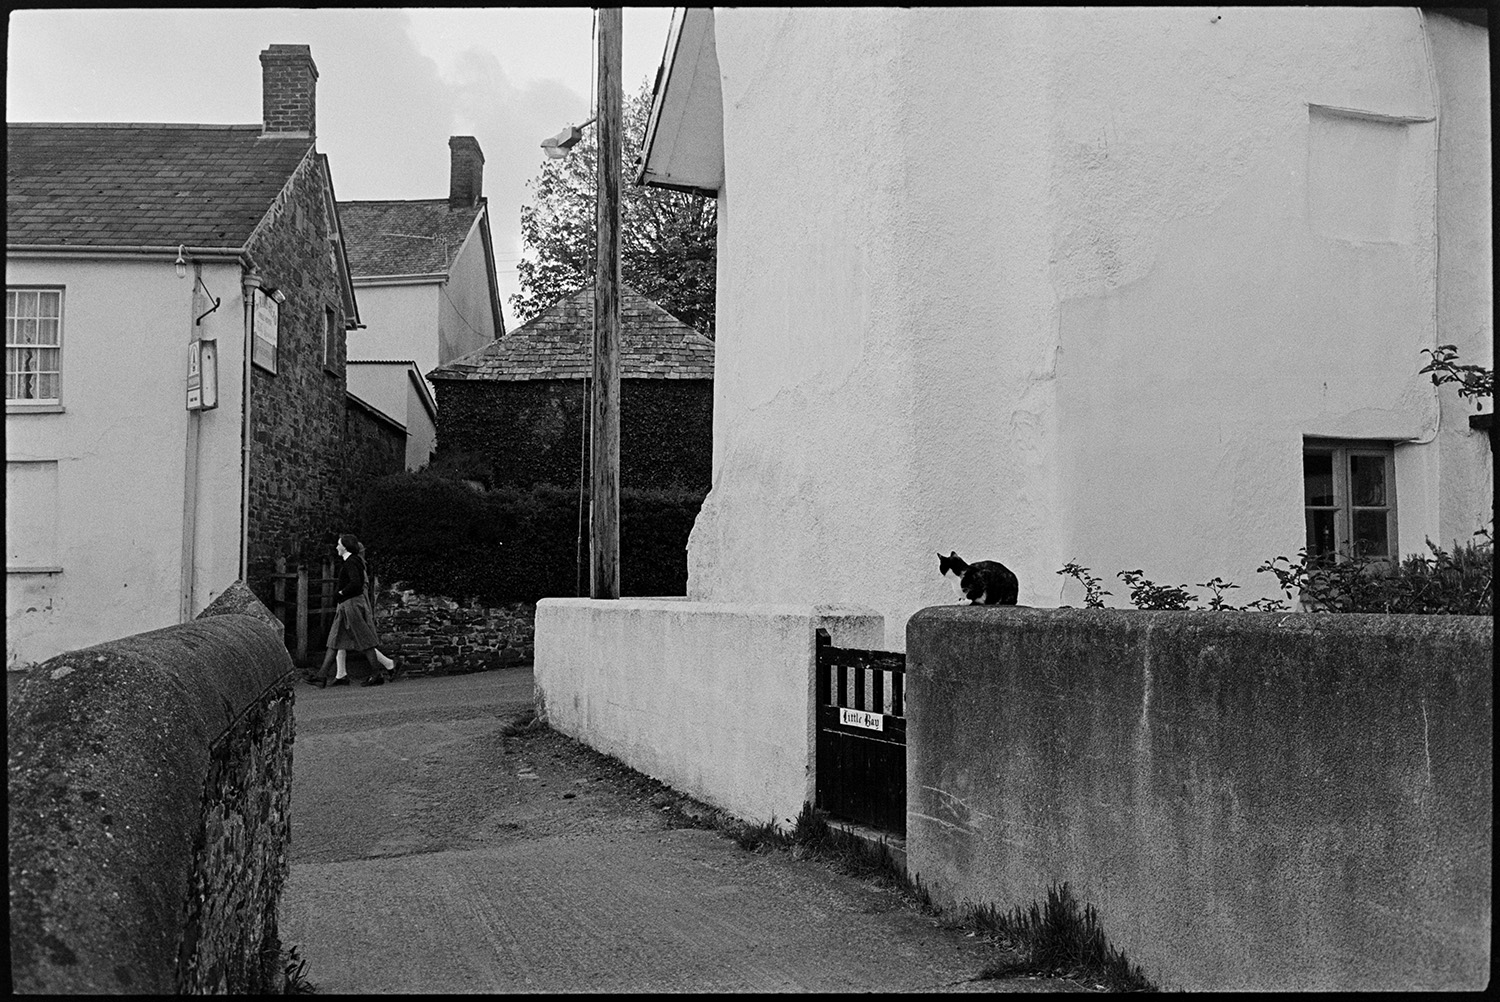 Village street scenes, bicycles, cat. 
[A lane in Kings Nympton running between houses. Two people can be seen walking along a street in the background and a cat is sat on the wall outside a house named 'Little Bay' in the foreground.]